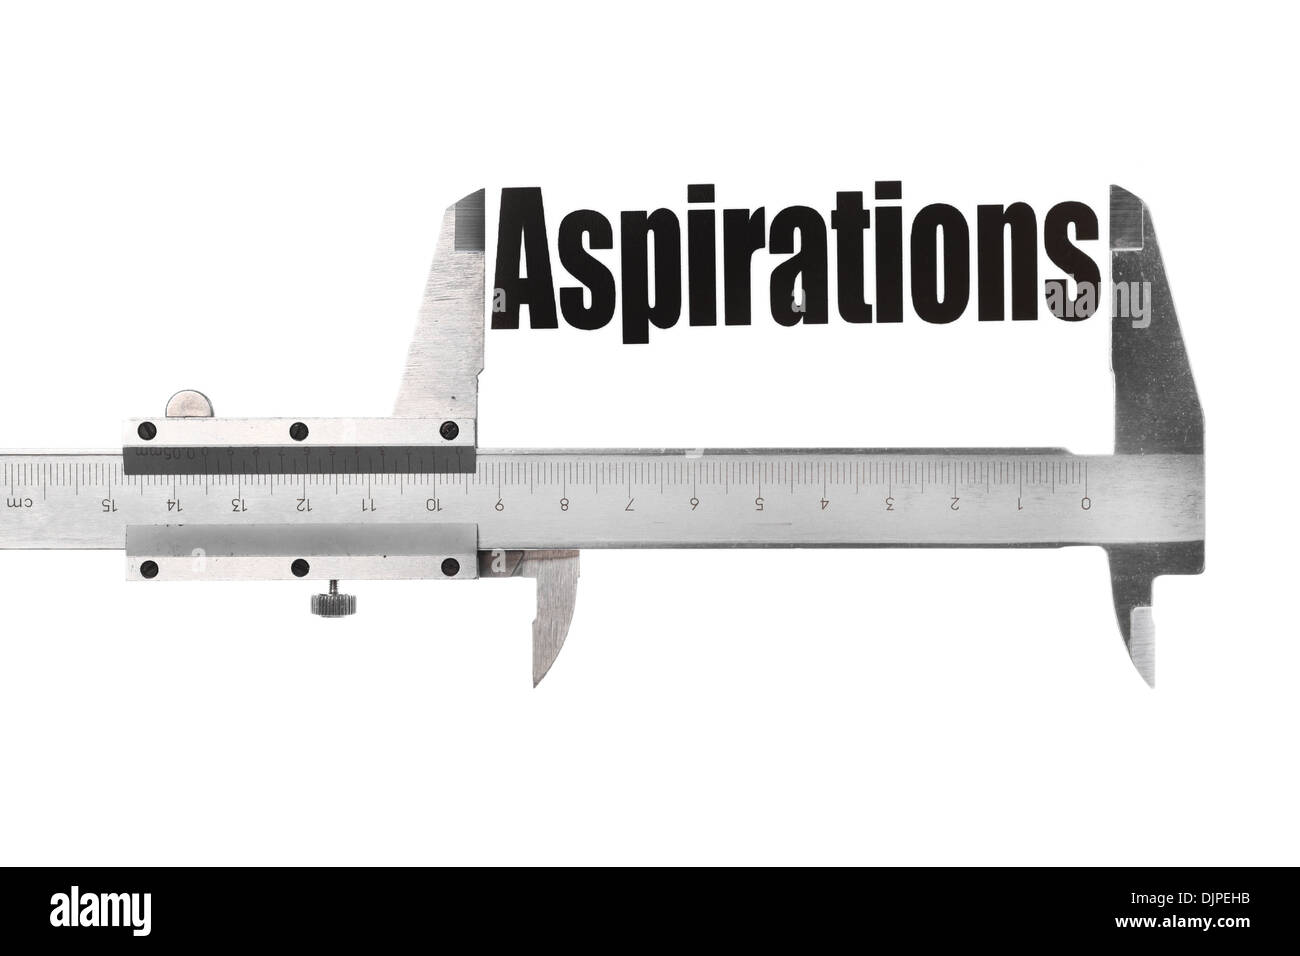 Close up shot of a caliper measuring the word 'Aspirations' Stock Photo